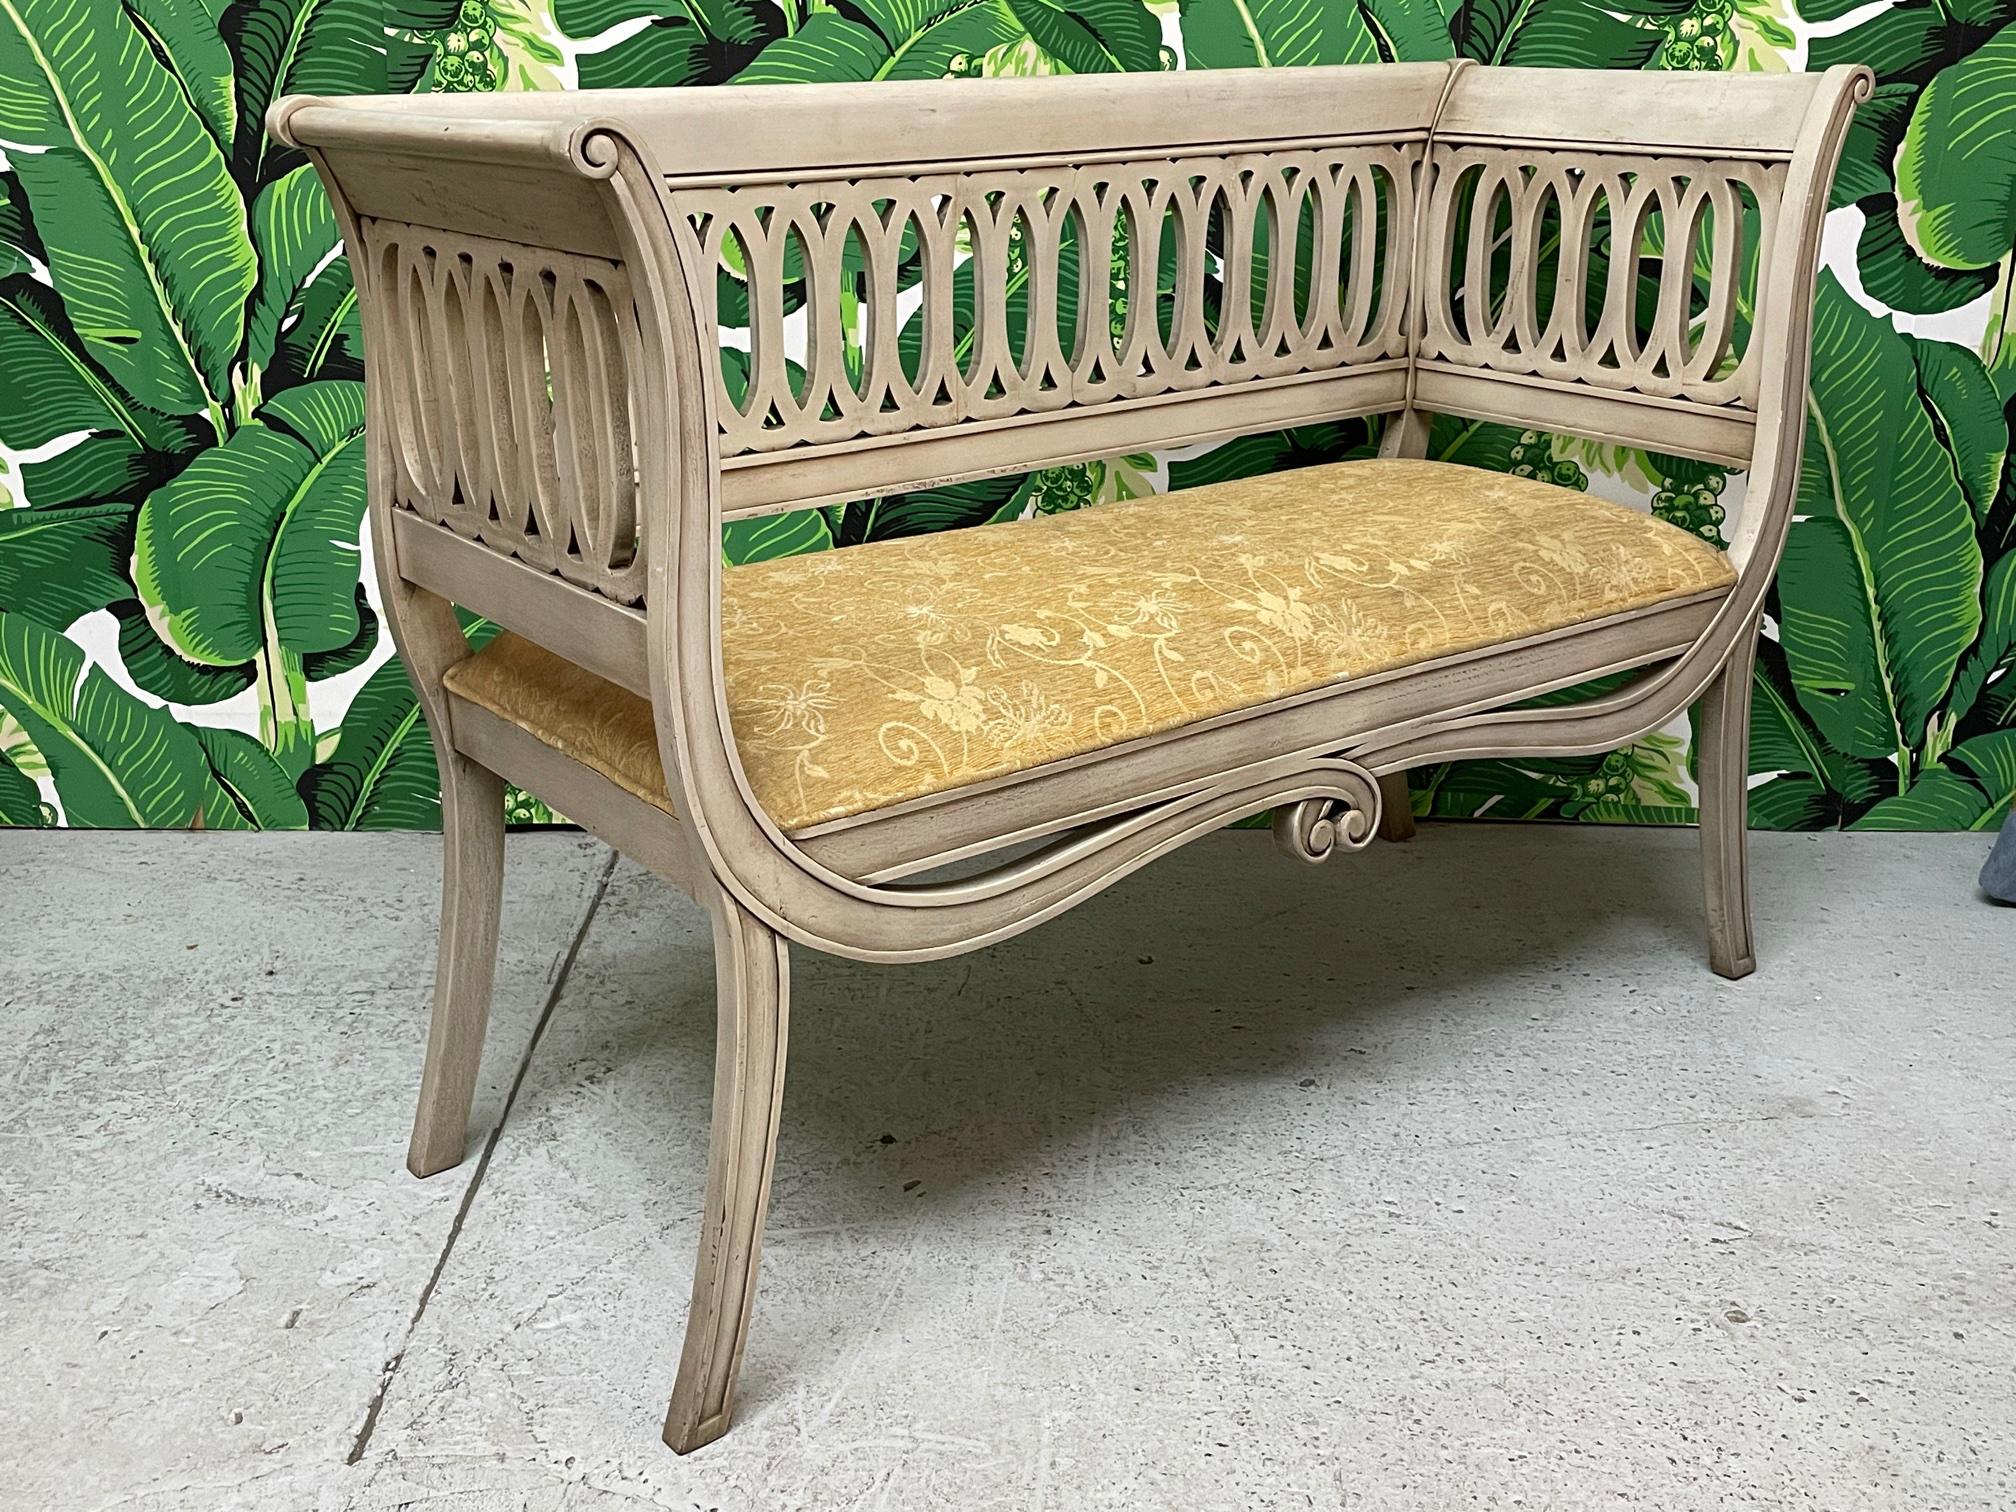 Regency style bench features a scrolled frame and sabre legs. Upholstered in a vintage tone on tone fabric. Finish appears to be original. Good condition with imperfections consistent with age some light staining on fabric, see photos for condition